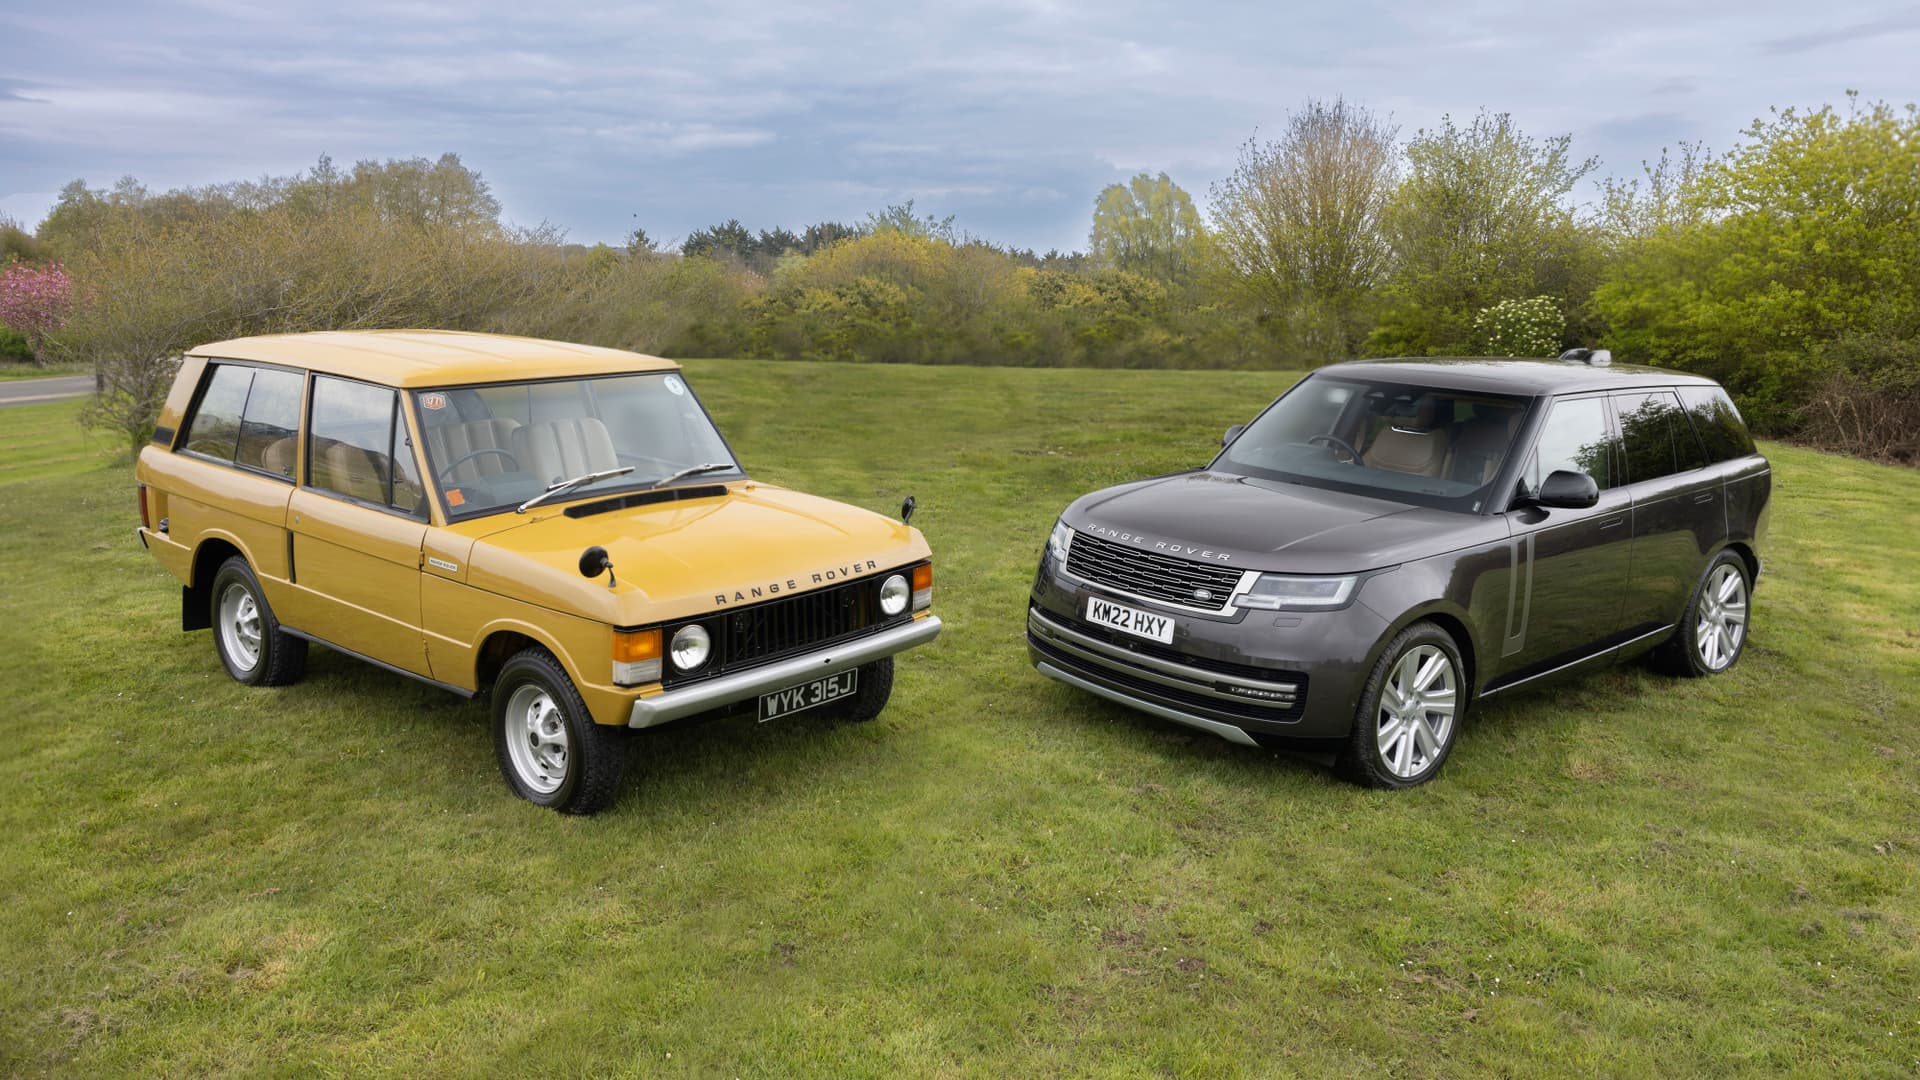 range rover vogue, range rover, land rover, landrover, jaguar land rover, jlr, wearnes automotive, land rover, range rover, landrover, wearnes automotive, jlr, jaguar land rover, range rover vs classic range rover : look how much they've changed: